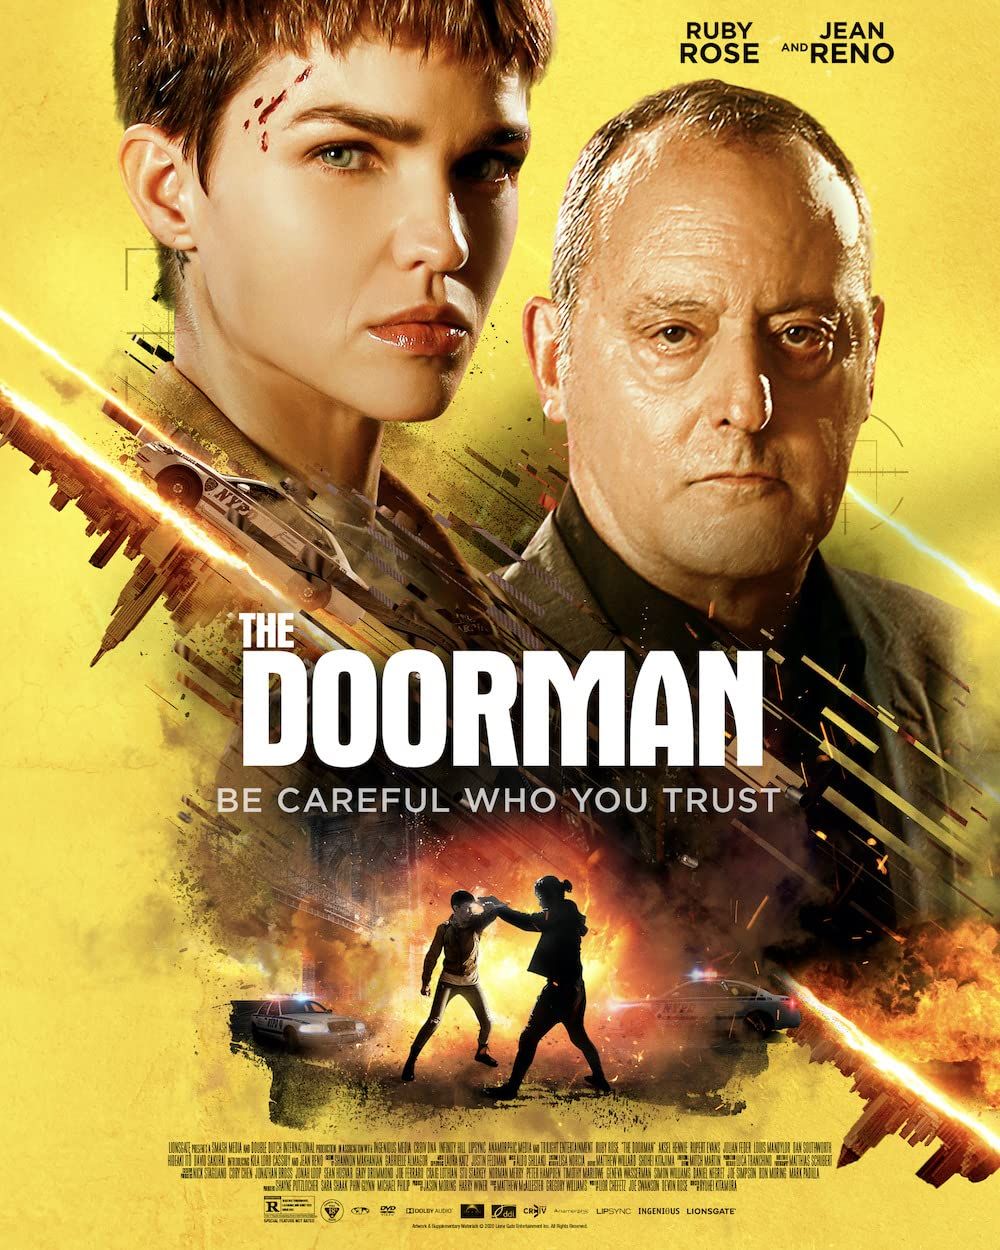 The Doorman (2020) Hindi Dubbed BluRay download full movie